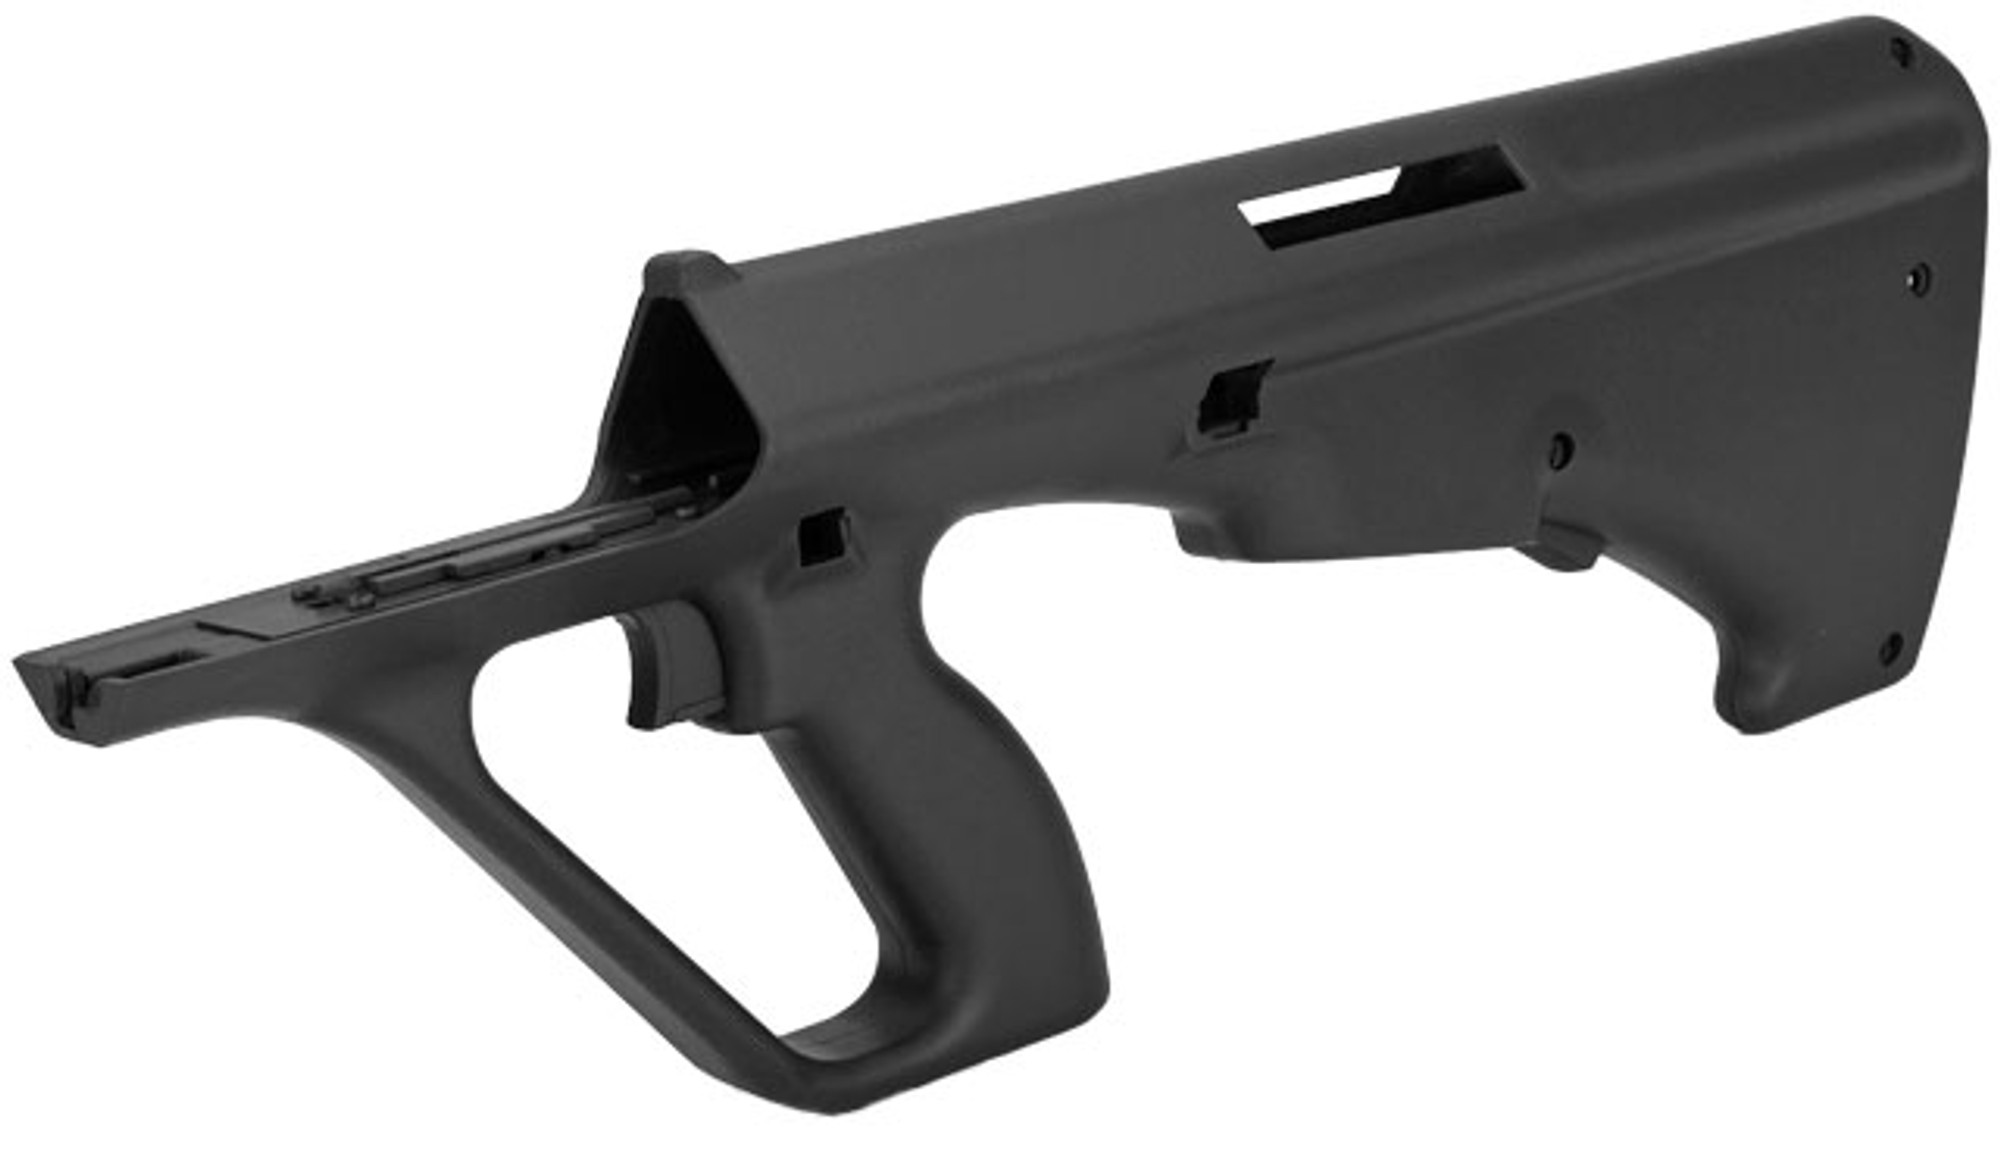 JG OEM Replacement Lower Receiver for AUG Series Airsoft AEG Rifles - Black